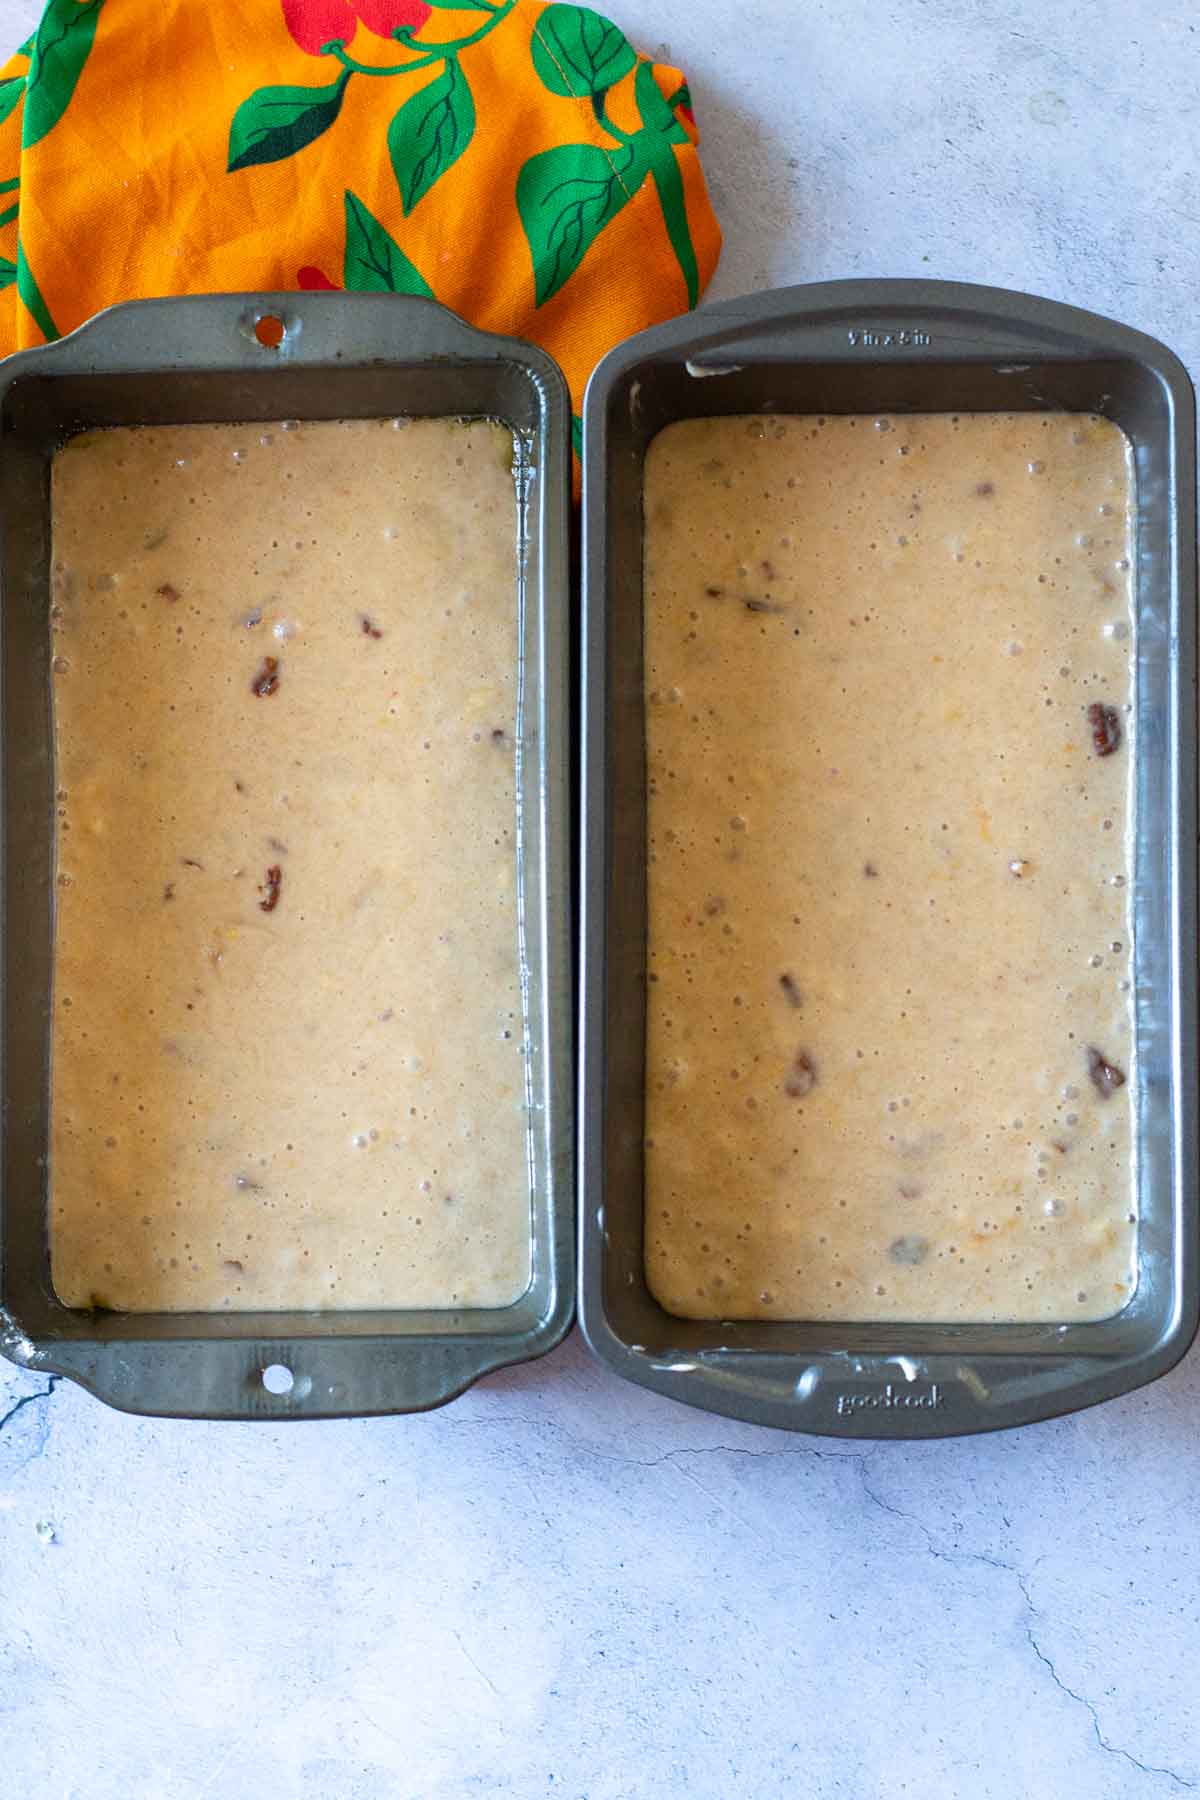 Batter in loaf pans to make peach bread.